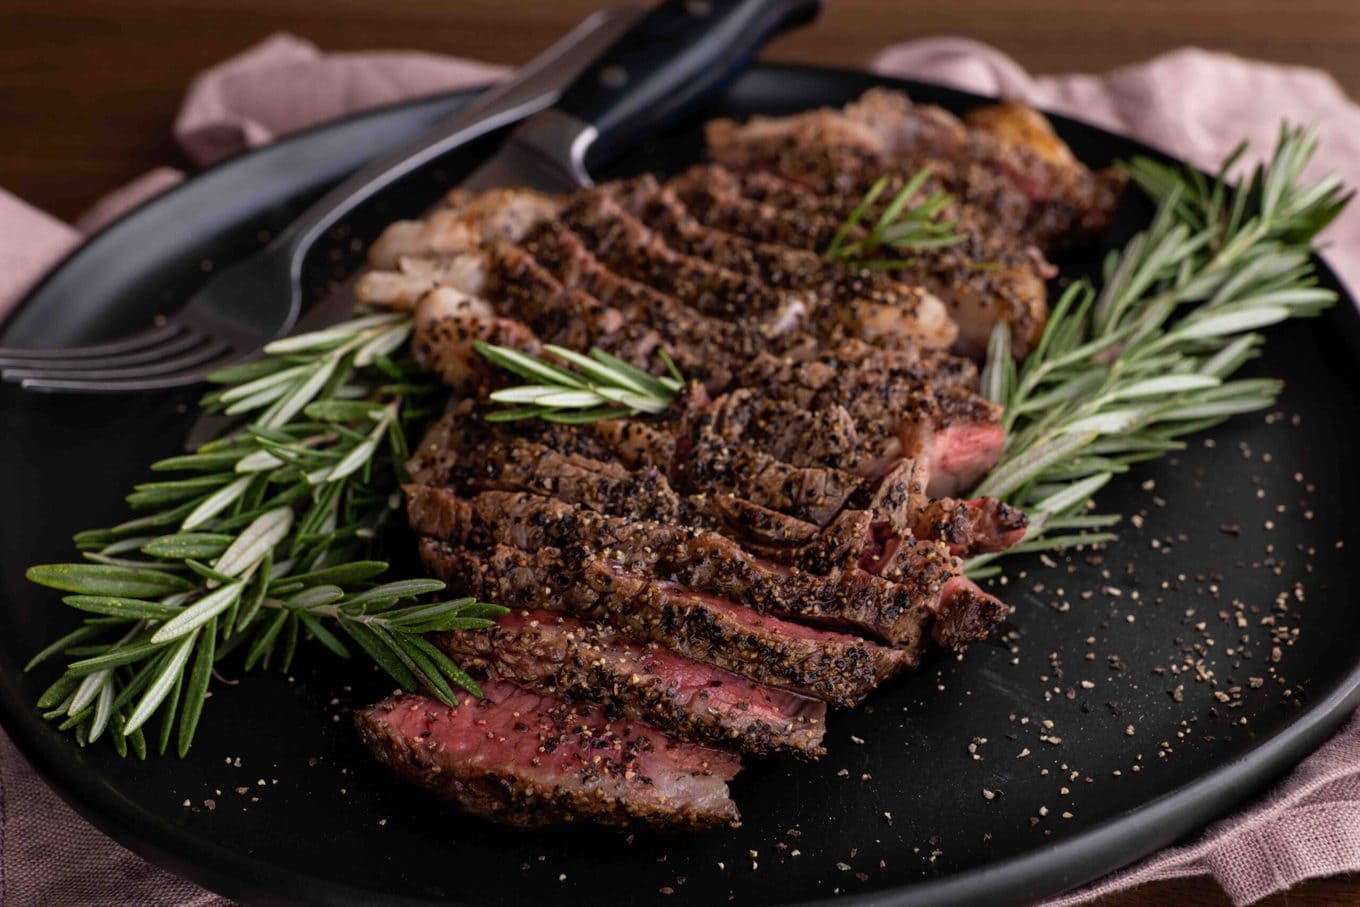 How to Cook Ribeye Steak in a Pan